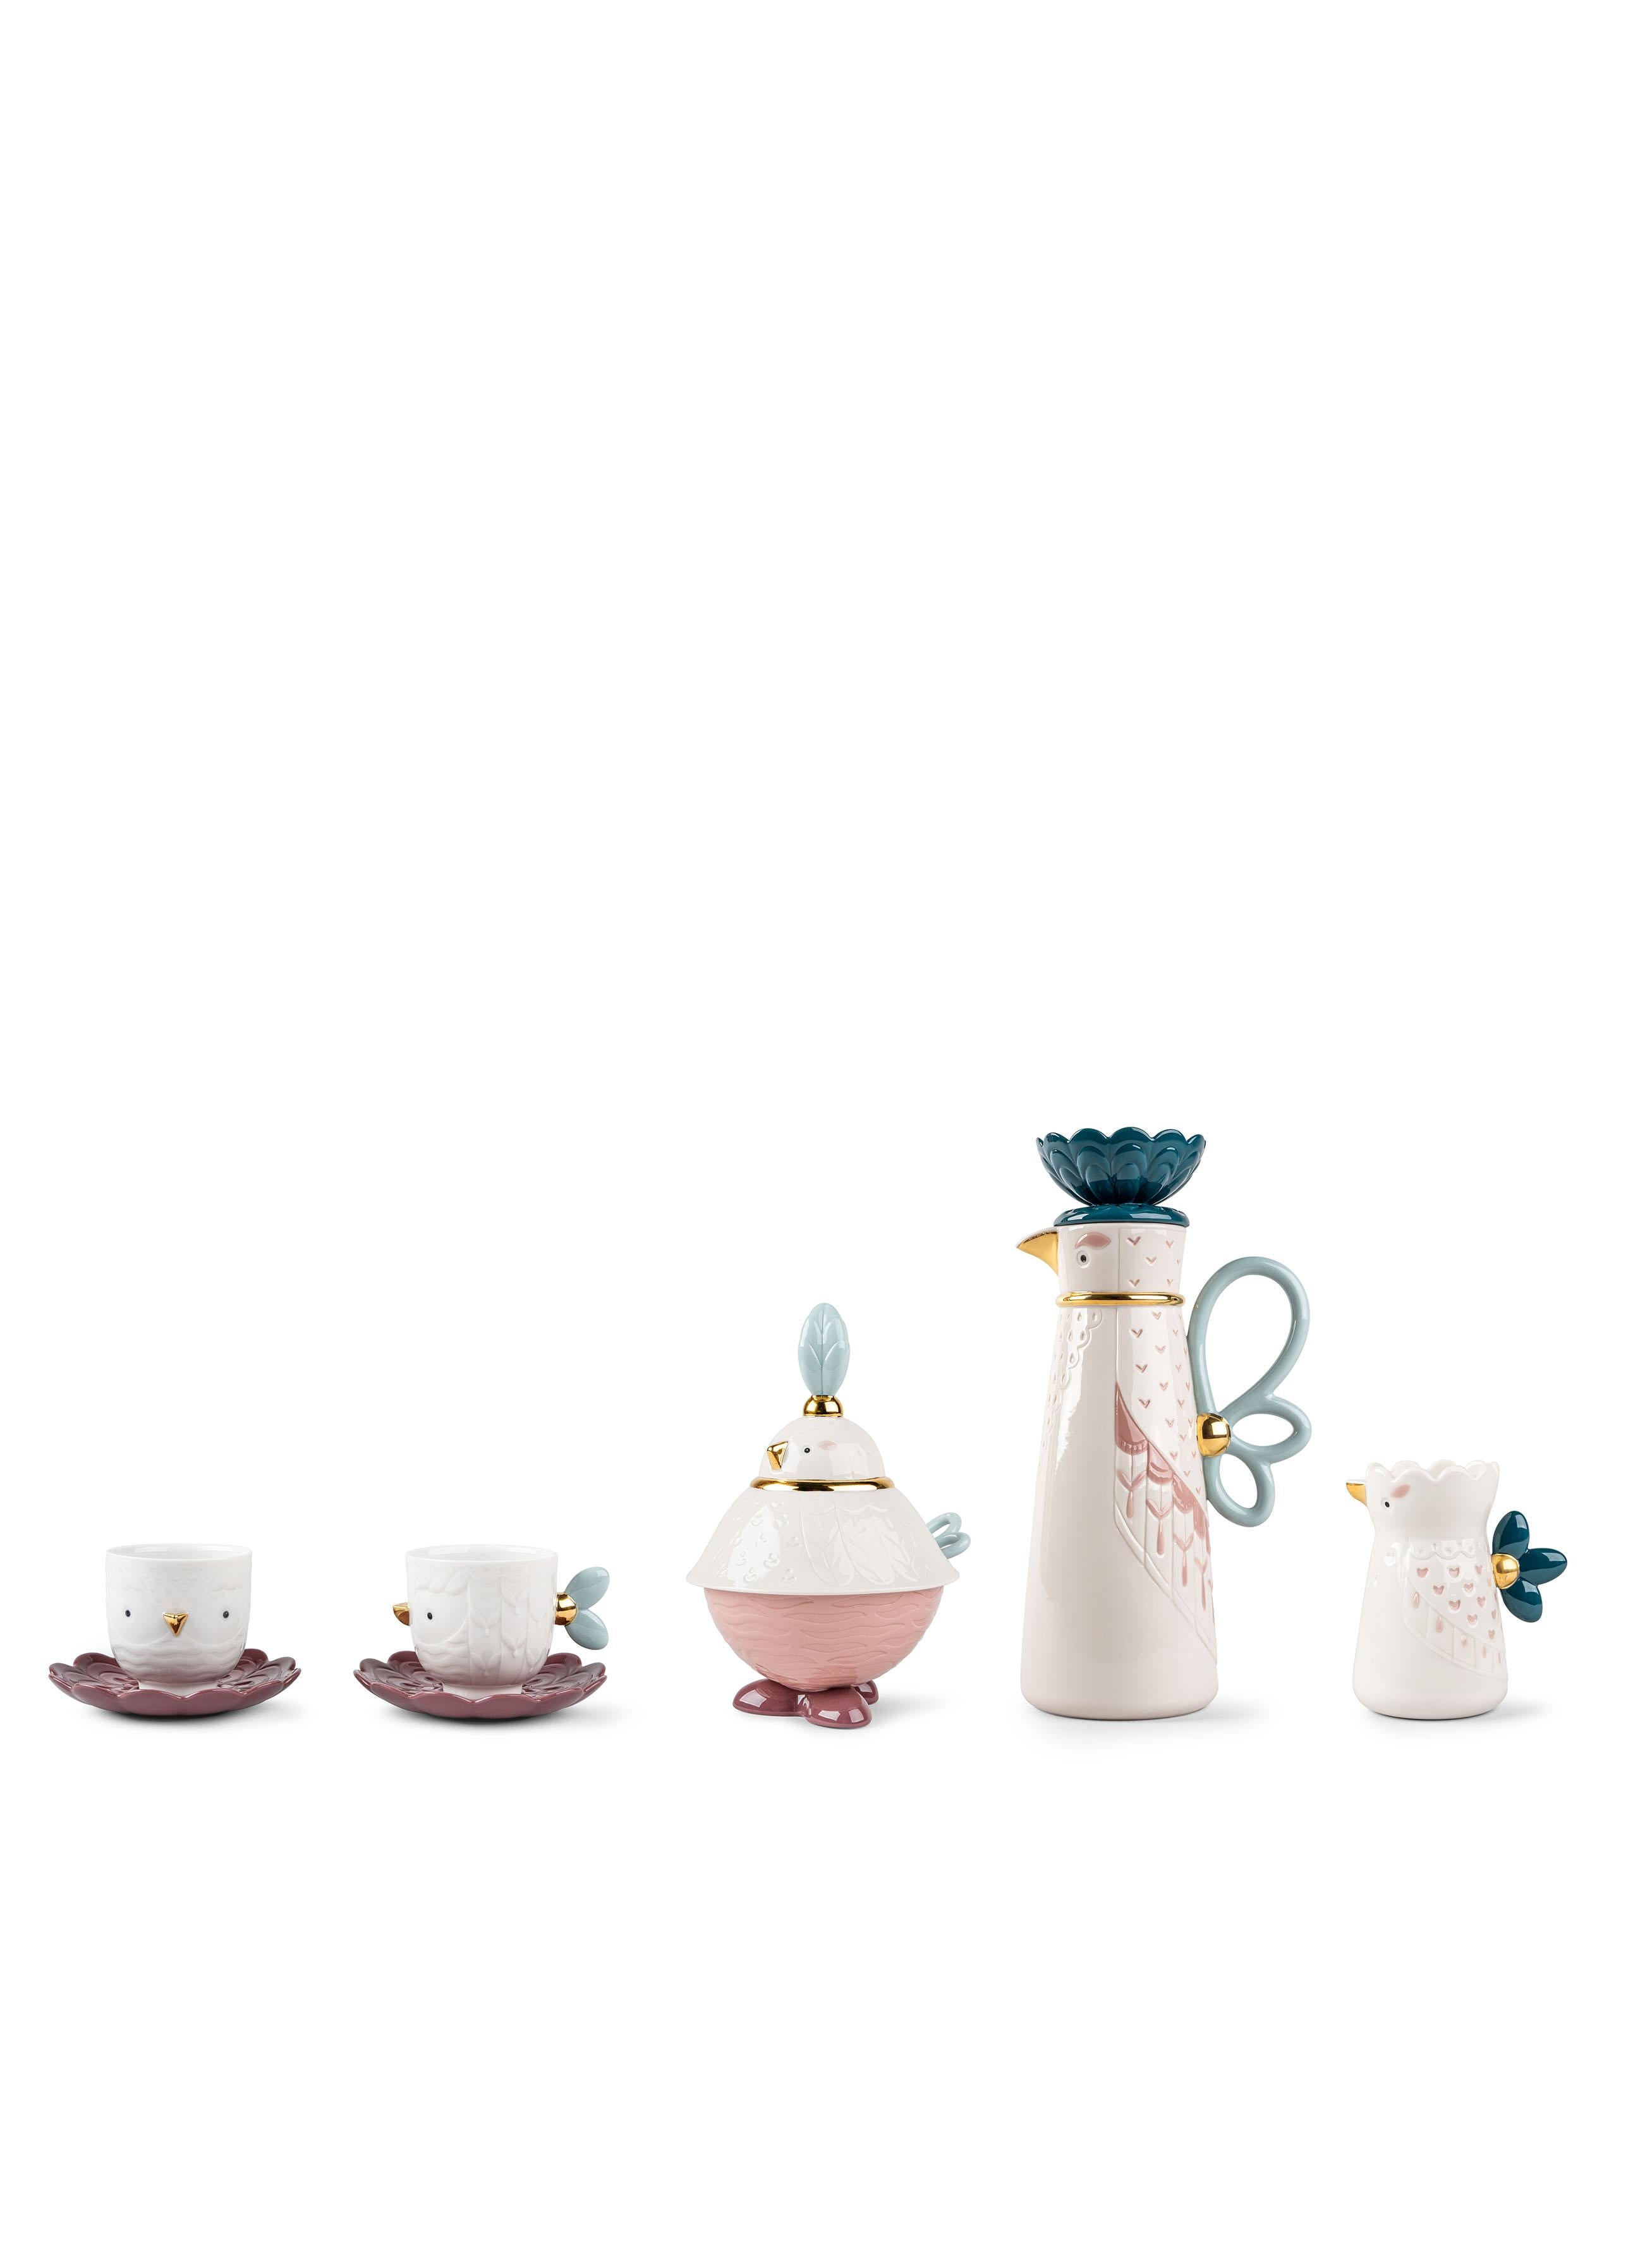 The Kawki collection is composed of an imaginative, fun and tender coffee set created for Lladró by Polish designer Aleksandra Zeromska. Inspired by Slavic folklore and the author's love of birds, the name of the collection refers to a Polish word